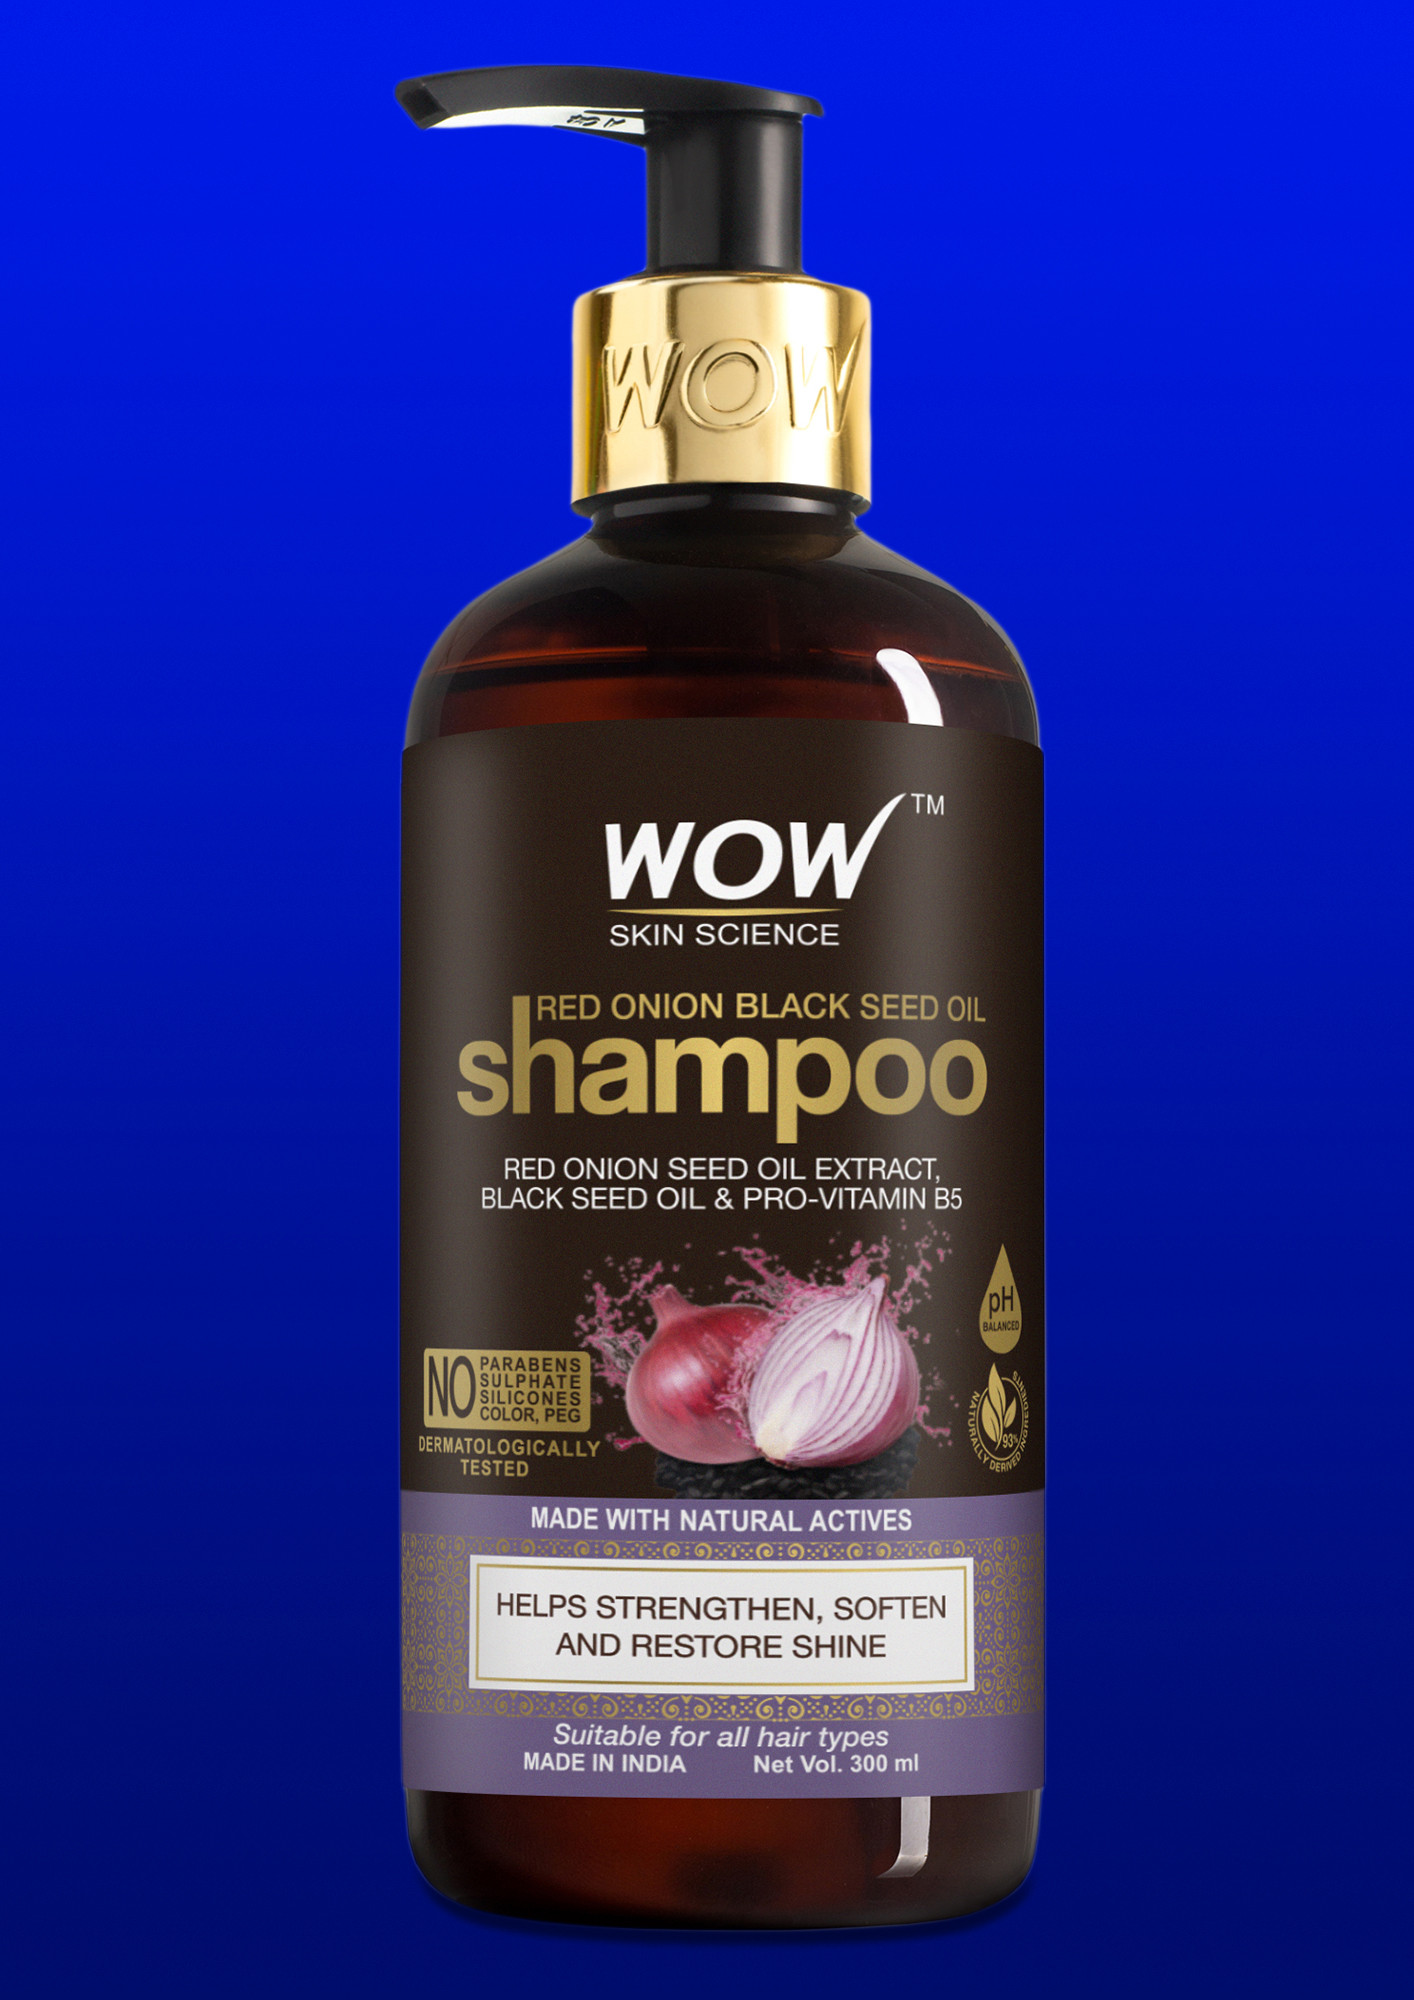 Buy WOW Skin Science Onion Black Seed Oil Hair Care Ultimate 4 Kit (Shampoo  + Hair Conditioner + Hair Oil + Hair Mask) for Women Online in India